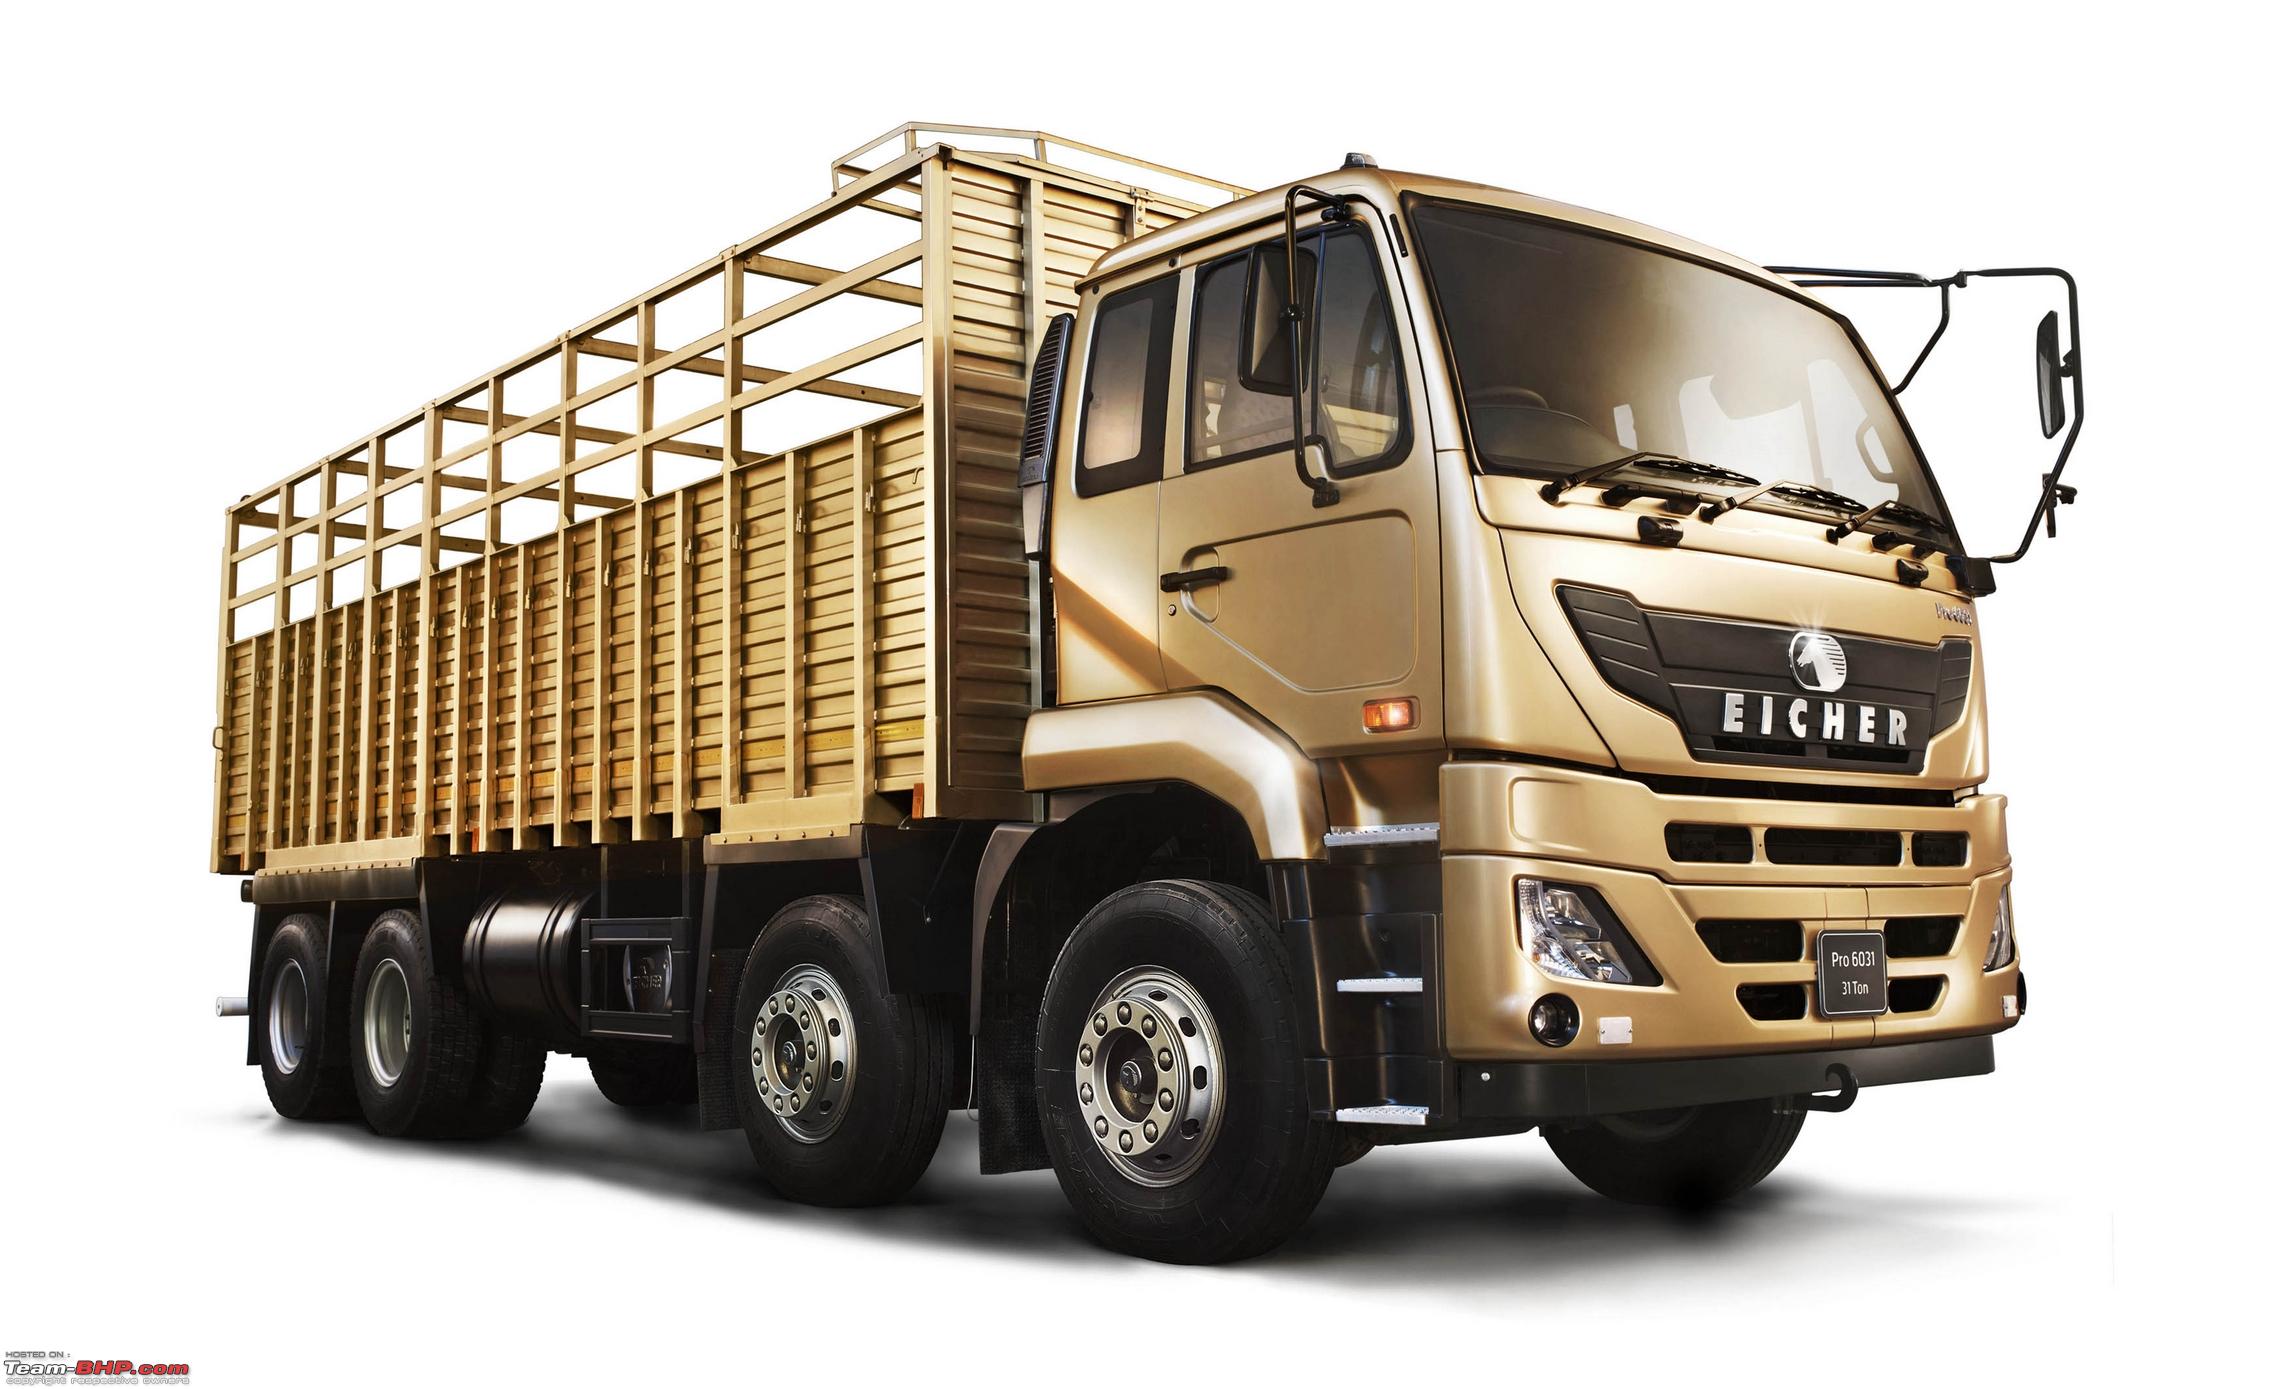  Eicher  Pro 6000 Series launched in West India markets 